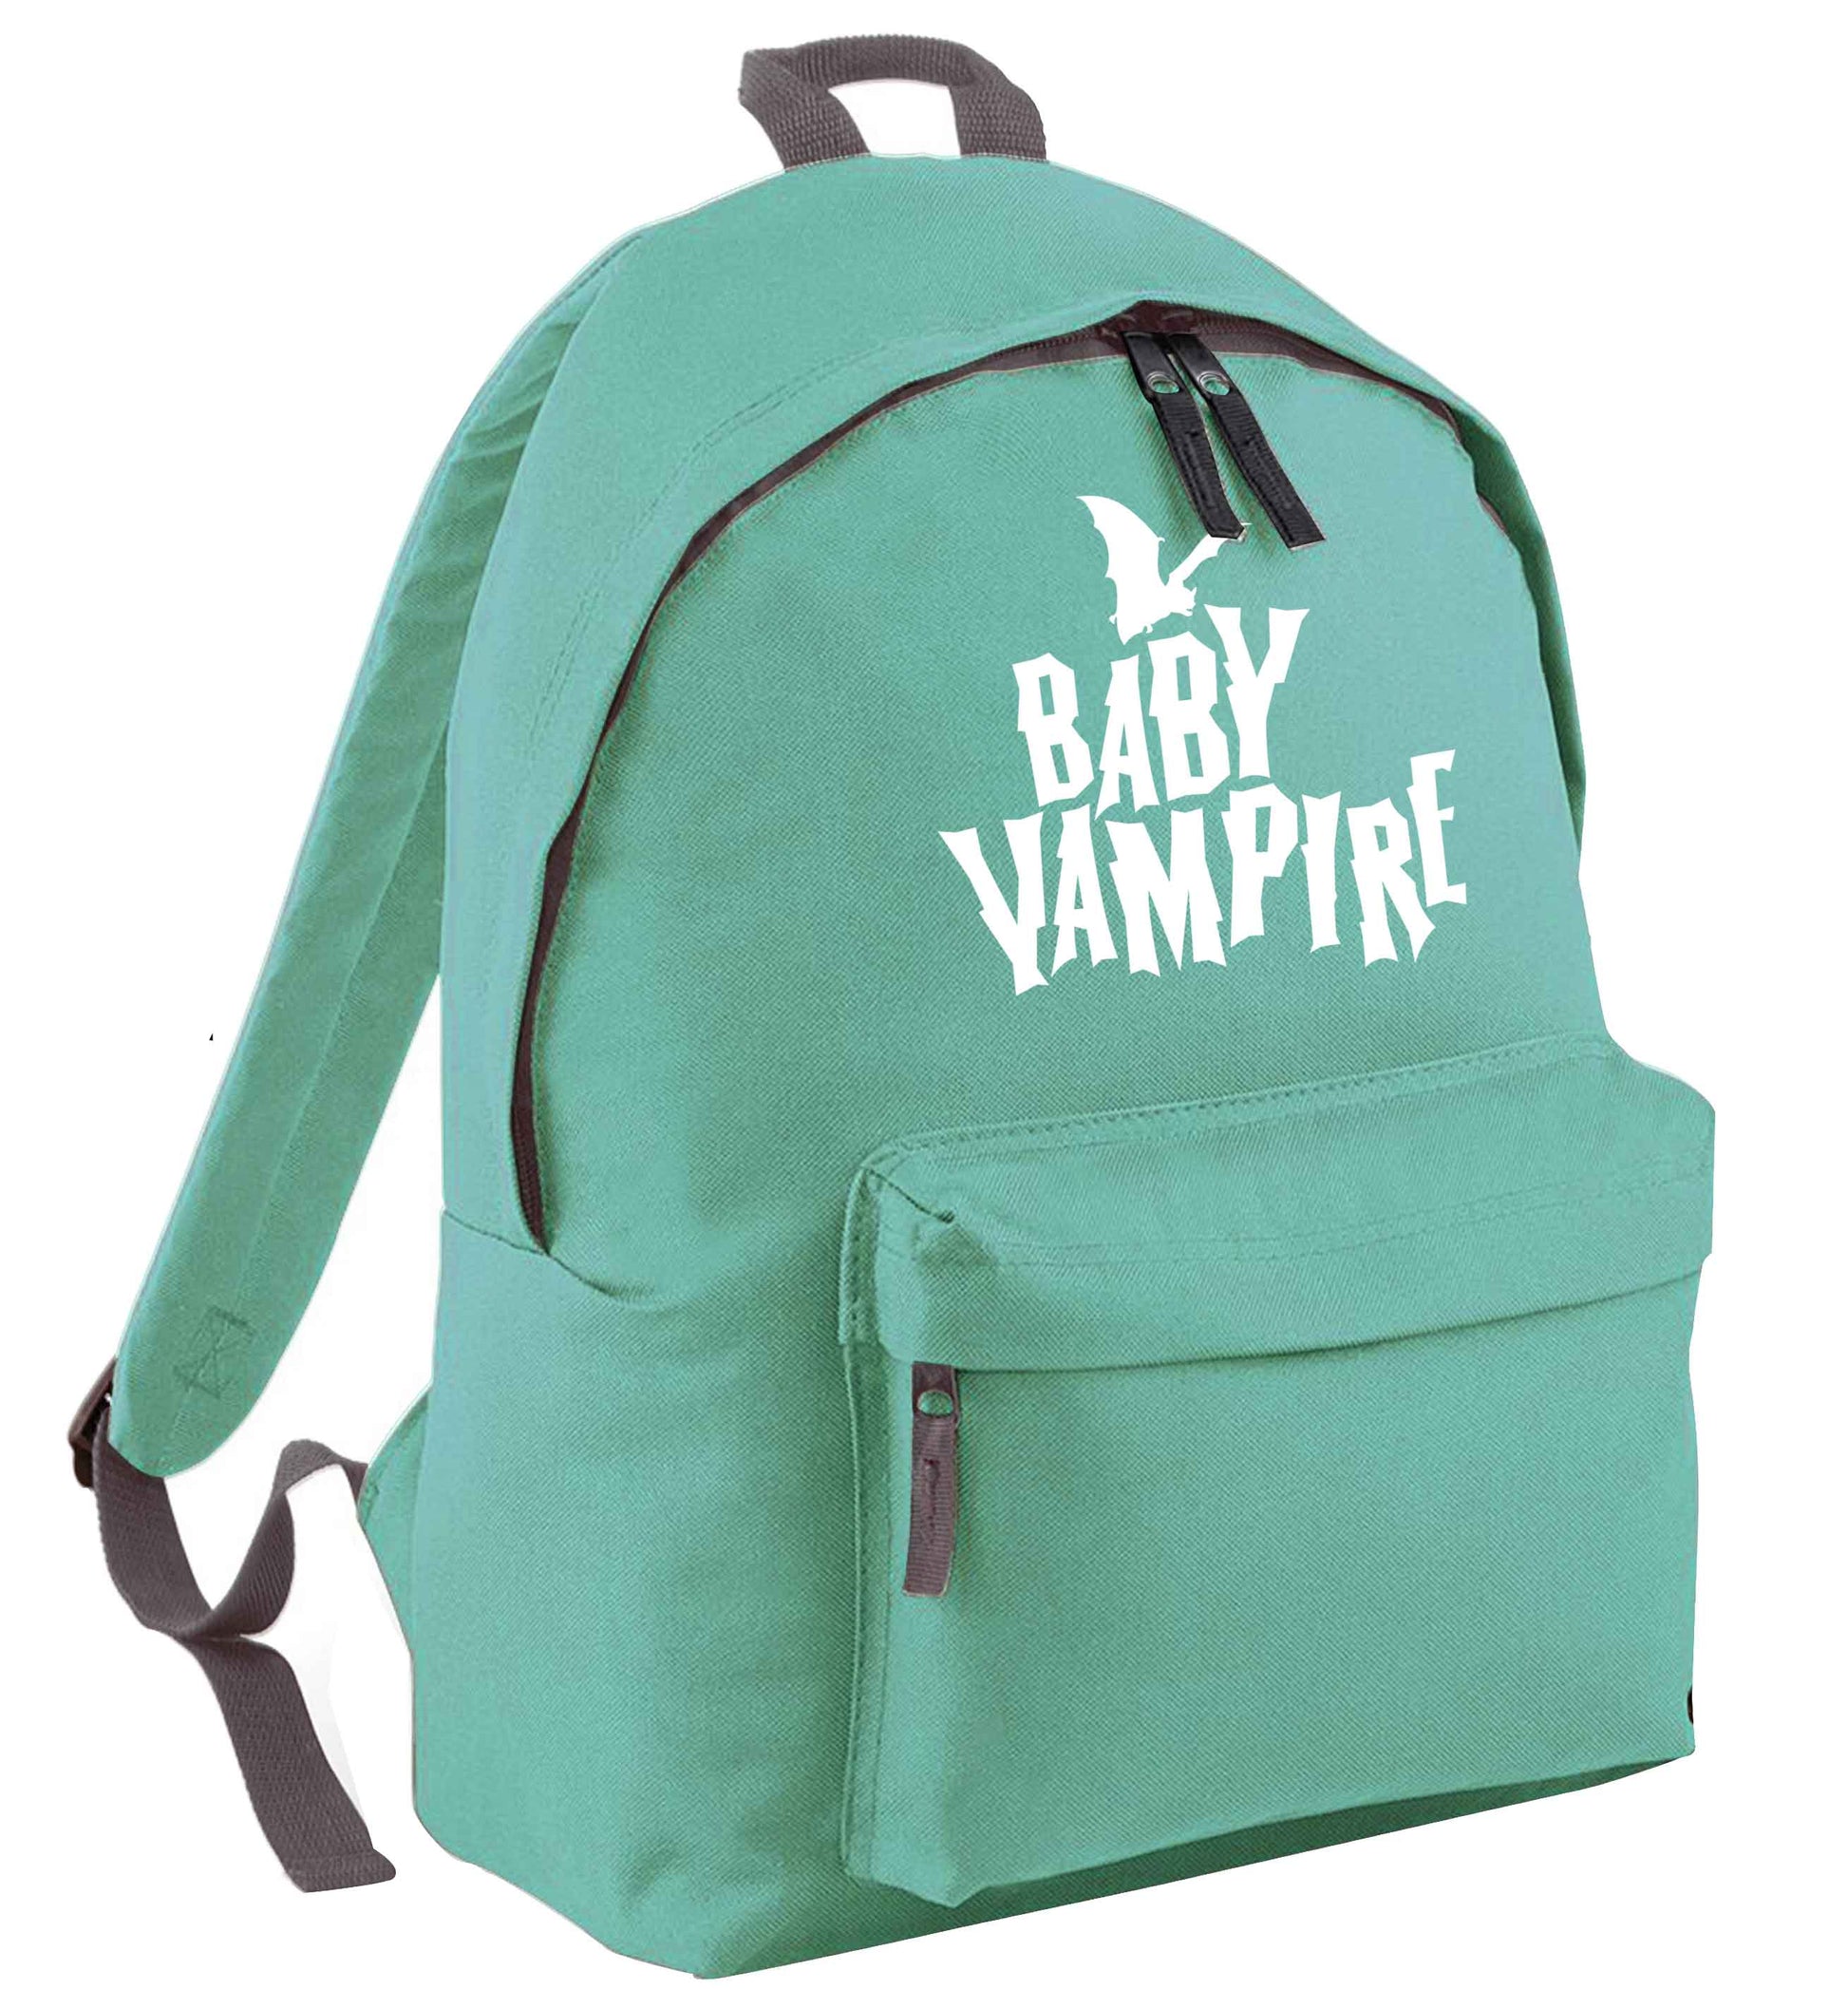 Baby vampire mint adults backpack